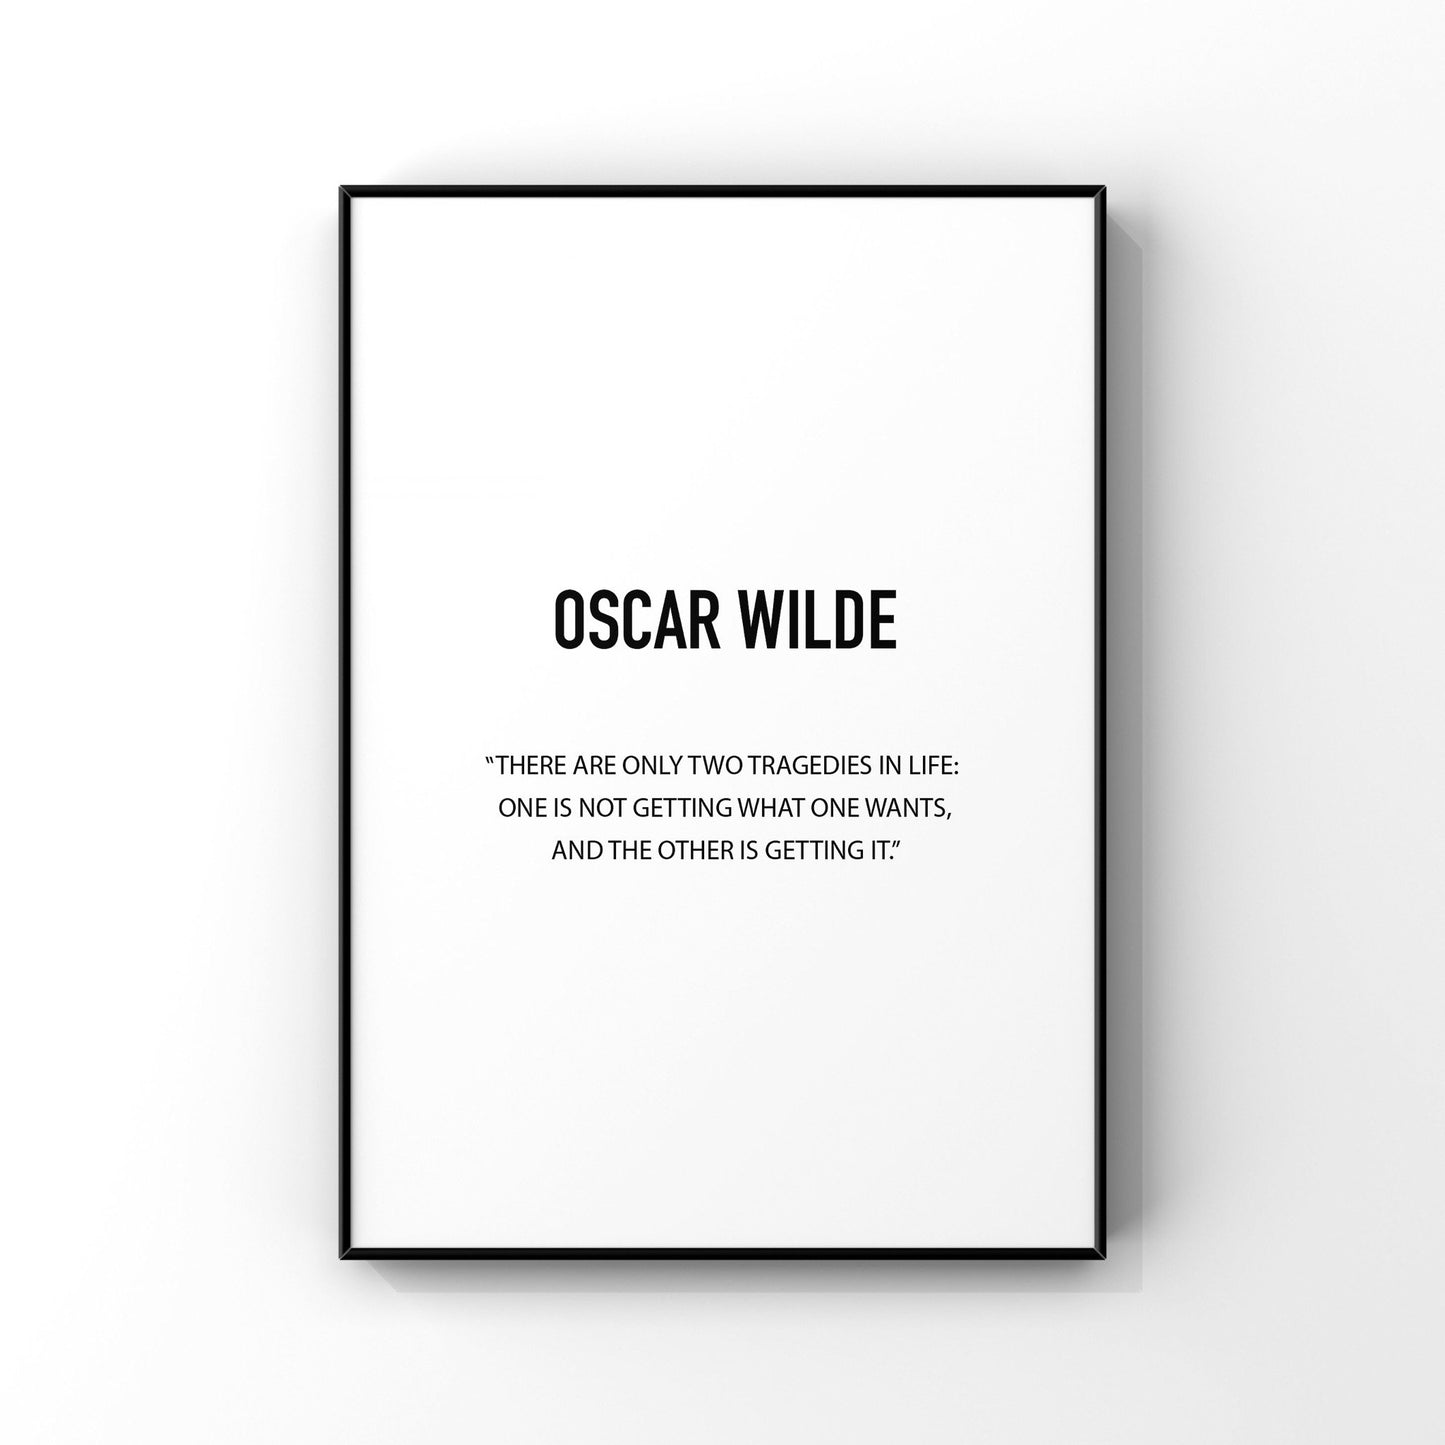 There are only two tragedies in life,Oscar Wilde quote,Inspirational print,Motivational saying,Quote wall art,Literary gifts,Literary print